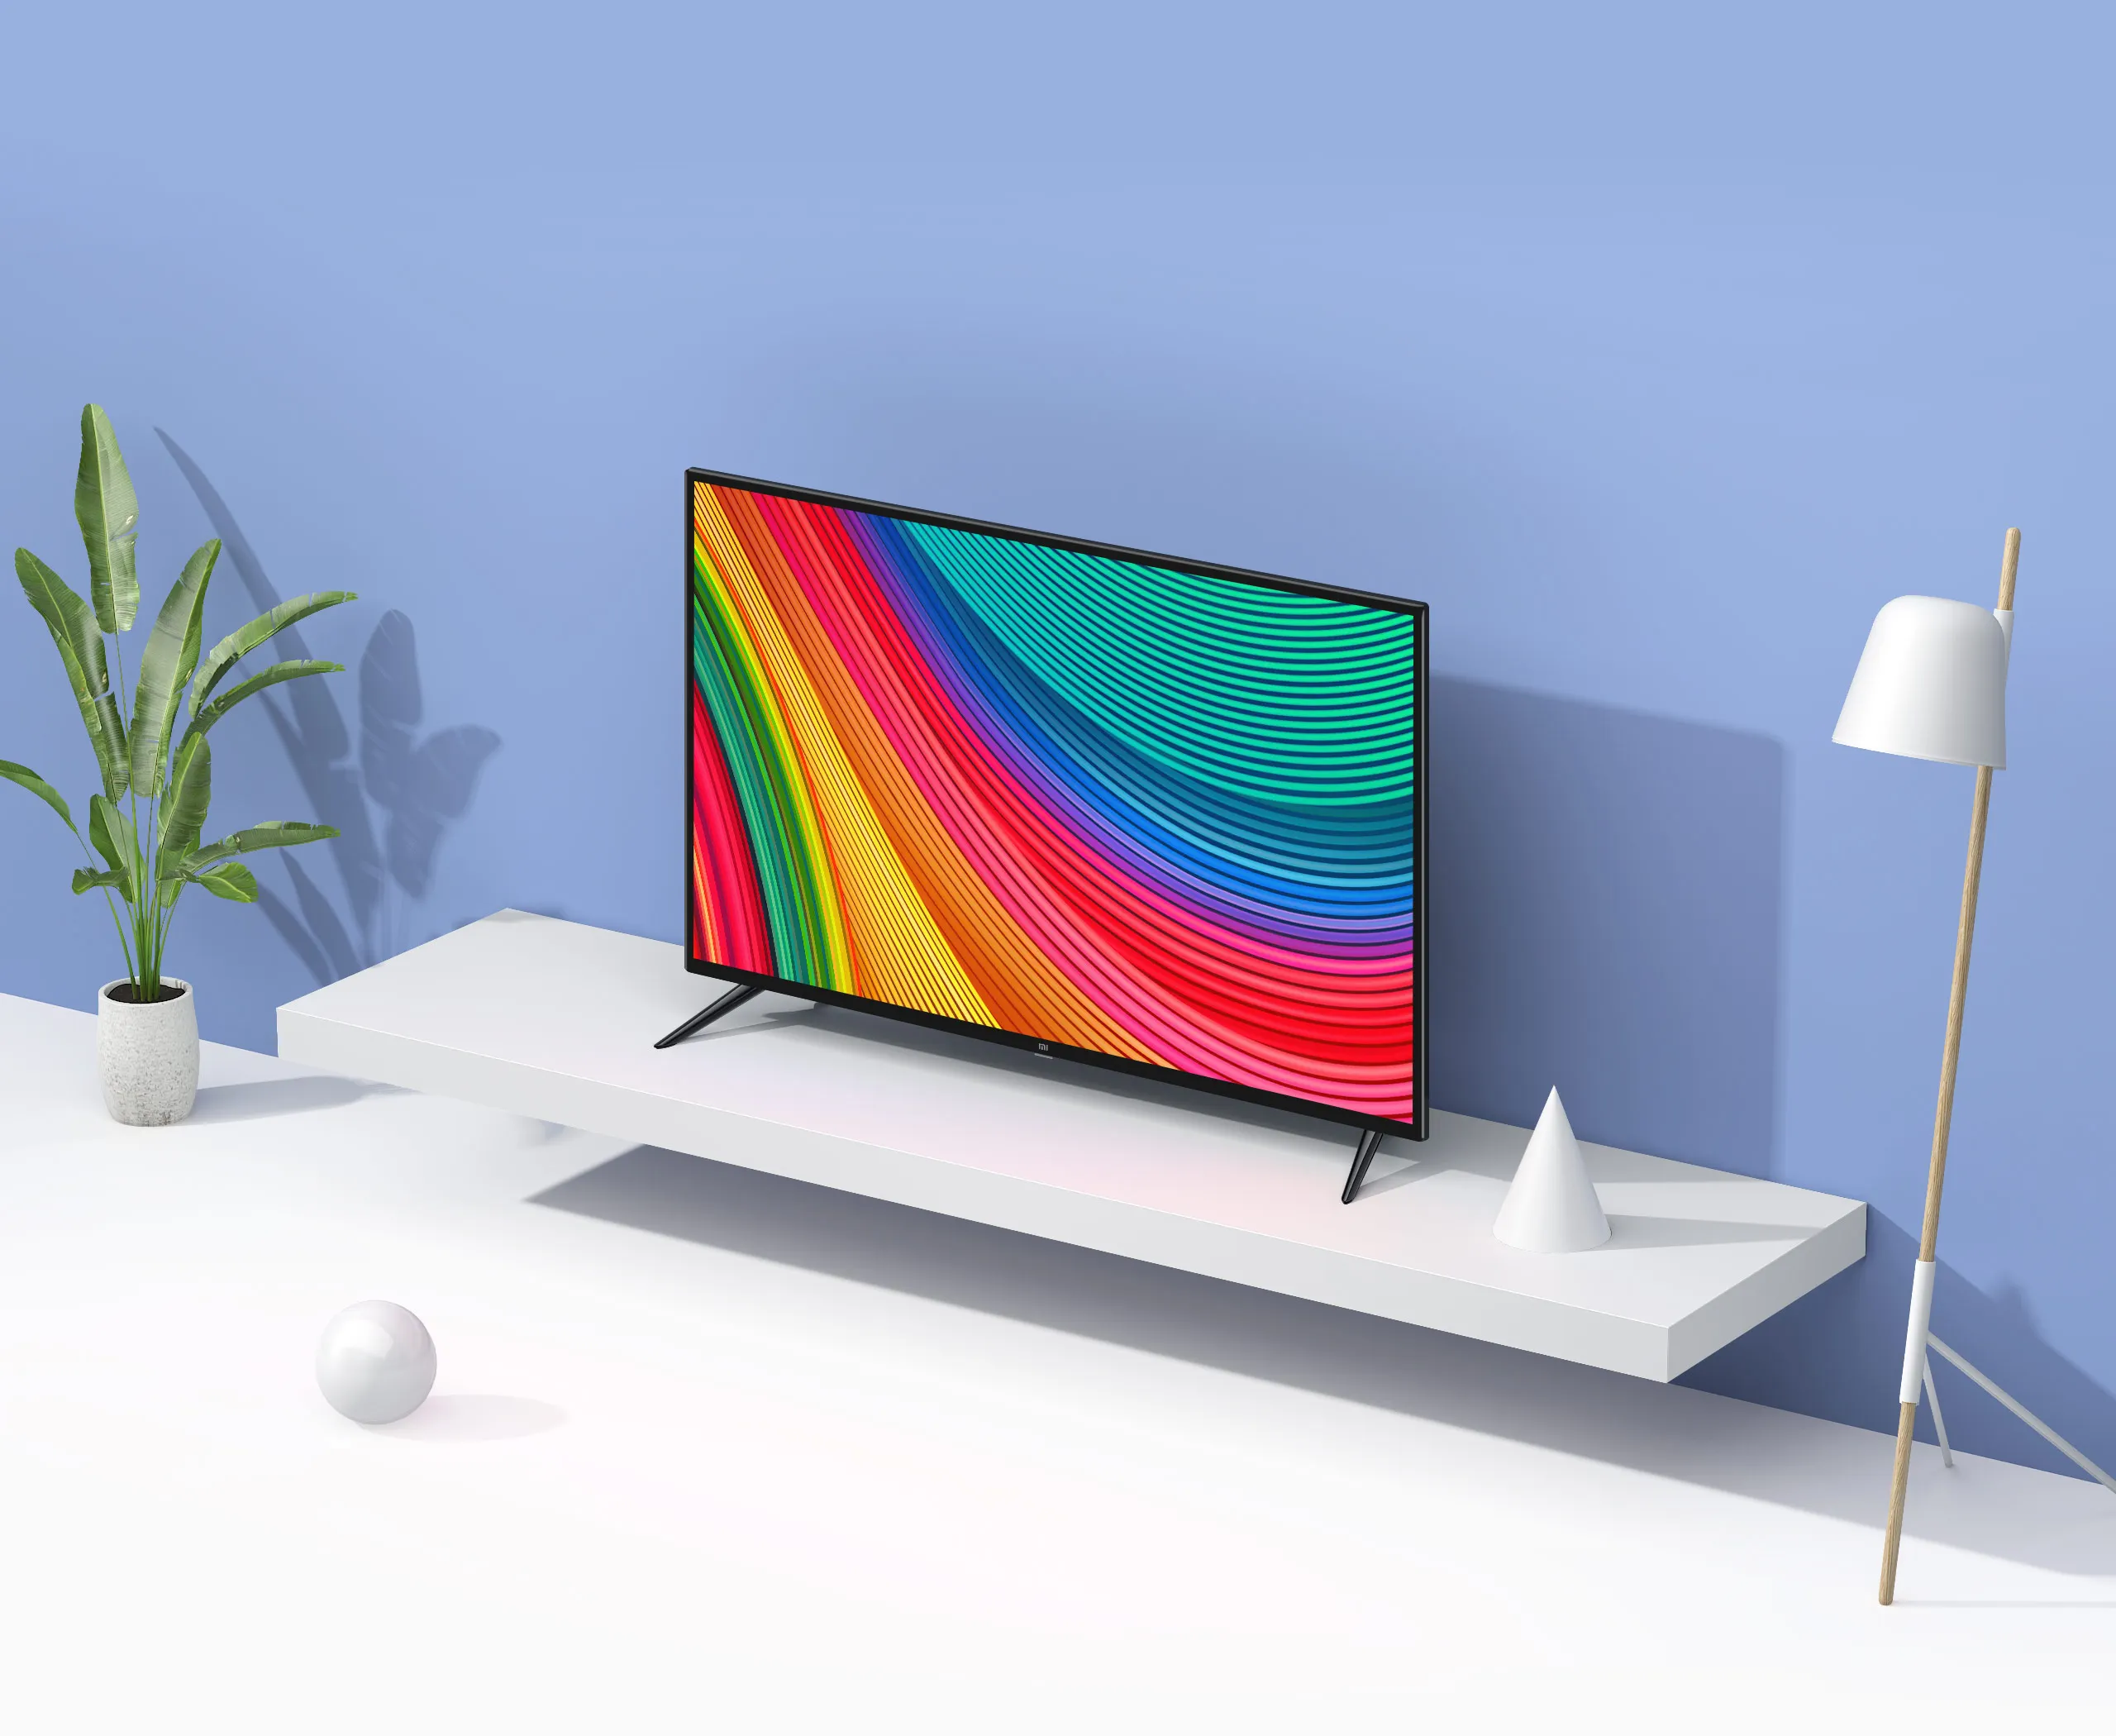 In Stock Xiaomi TV smart TV 4S 43inch 32inch Television Voice Control 2GB RAM 8GB ROM 5G WIFI Android 9.0 4K UHD Smart TV